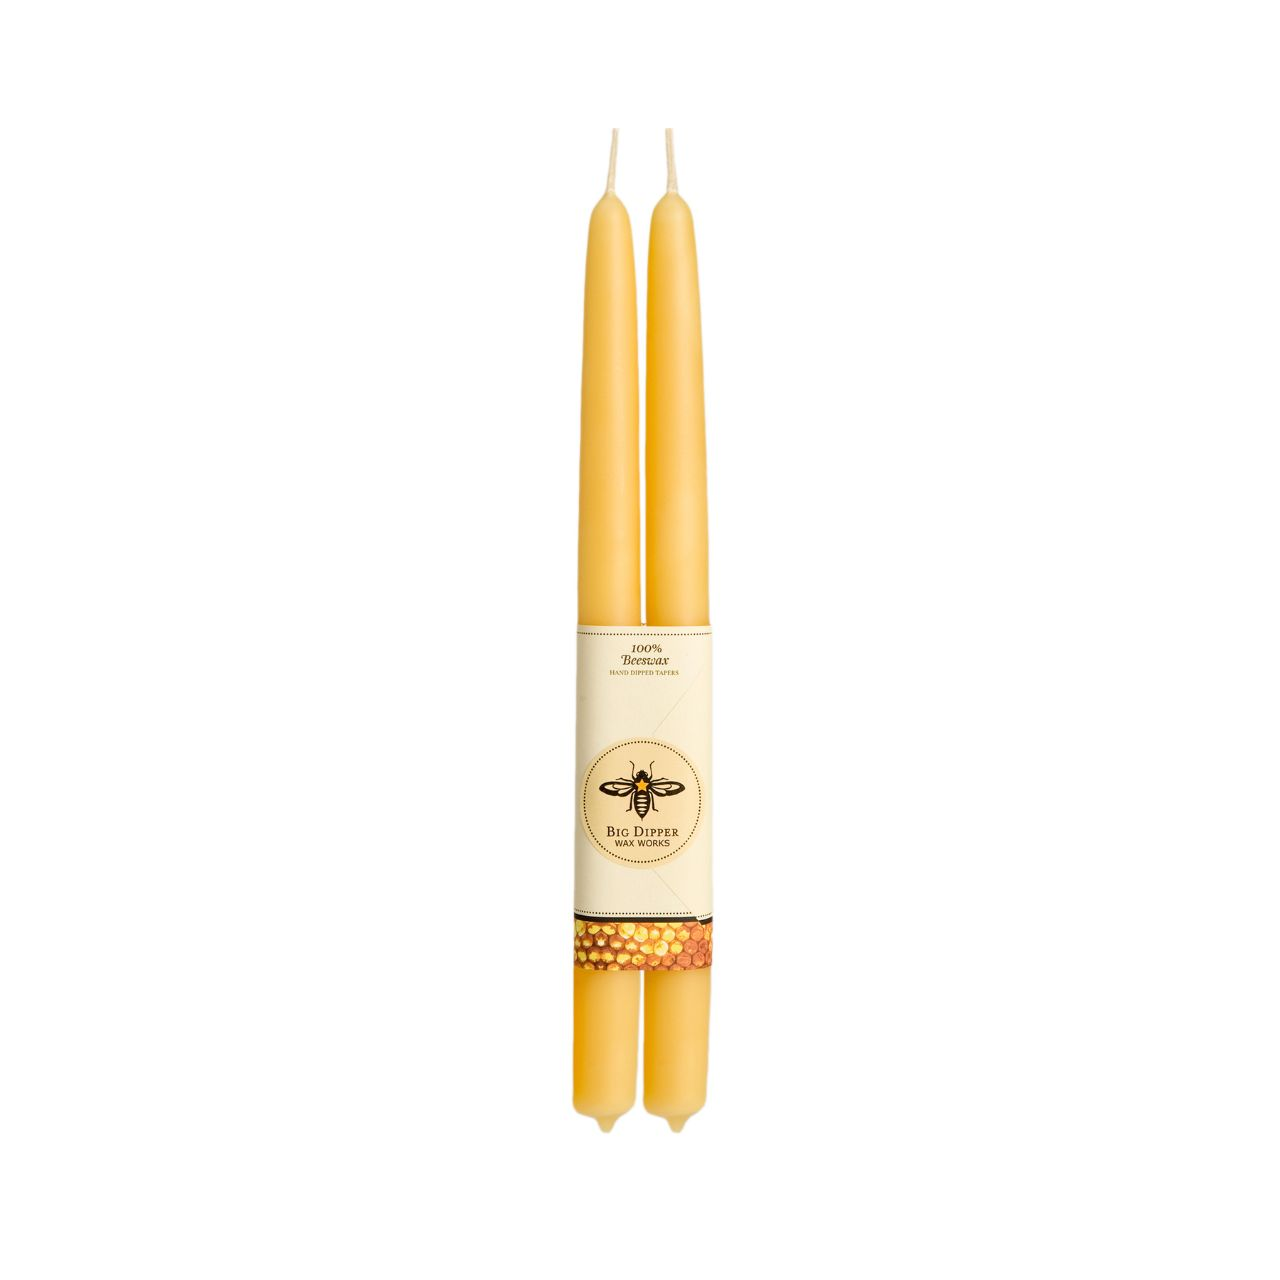 Big Dipper Beeswax Tapers